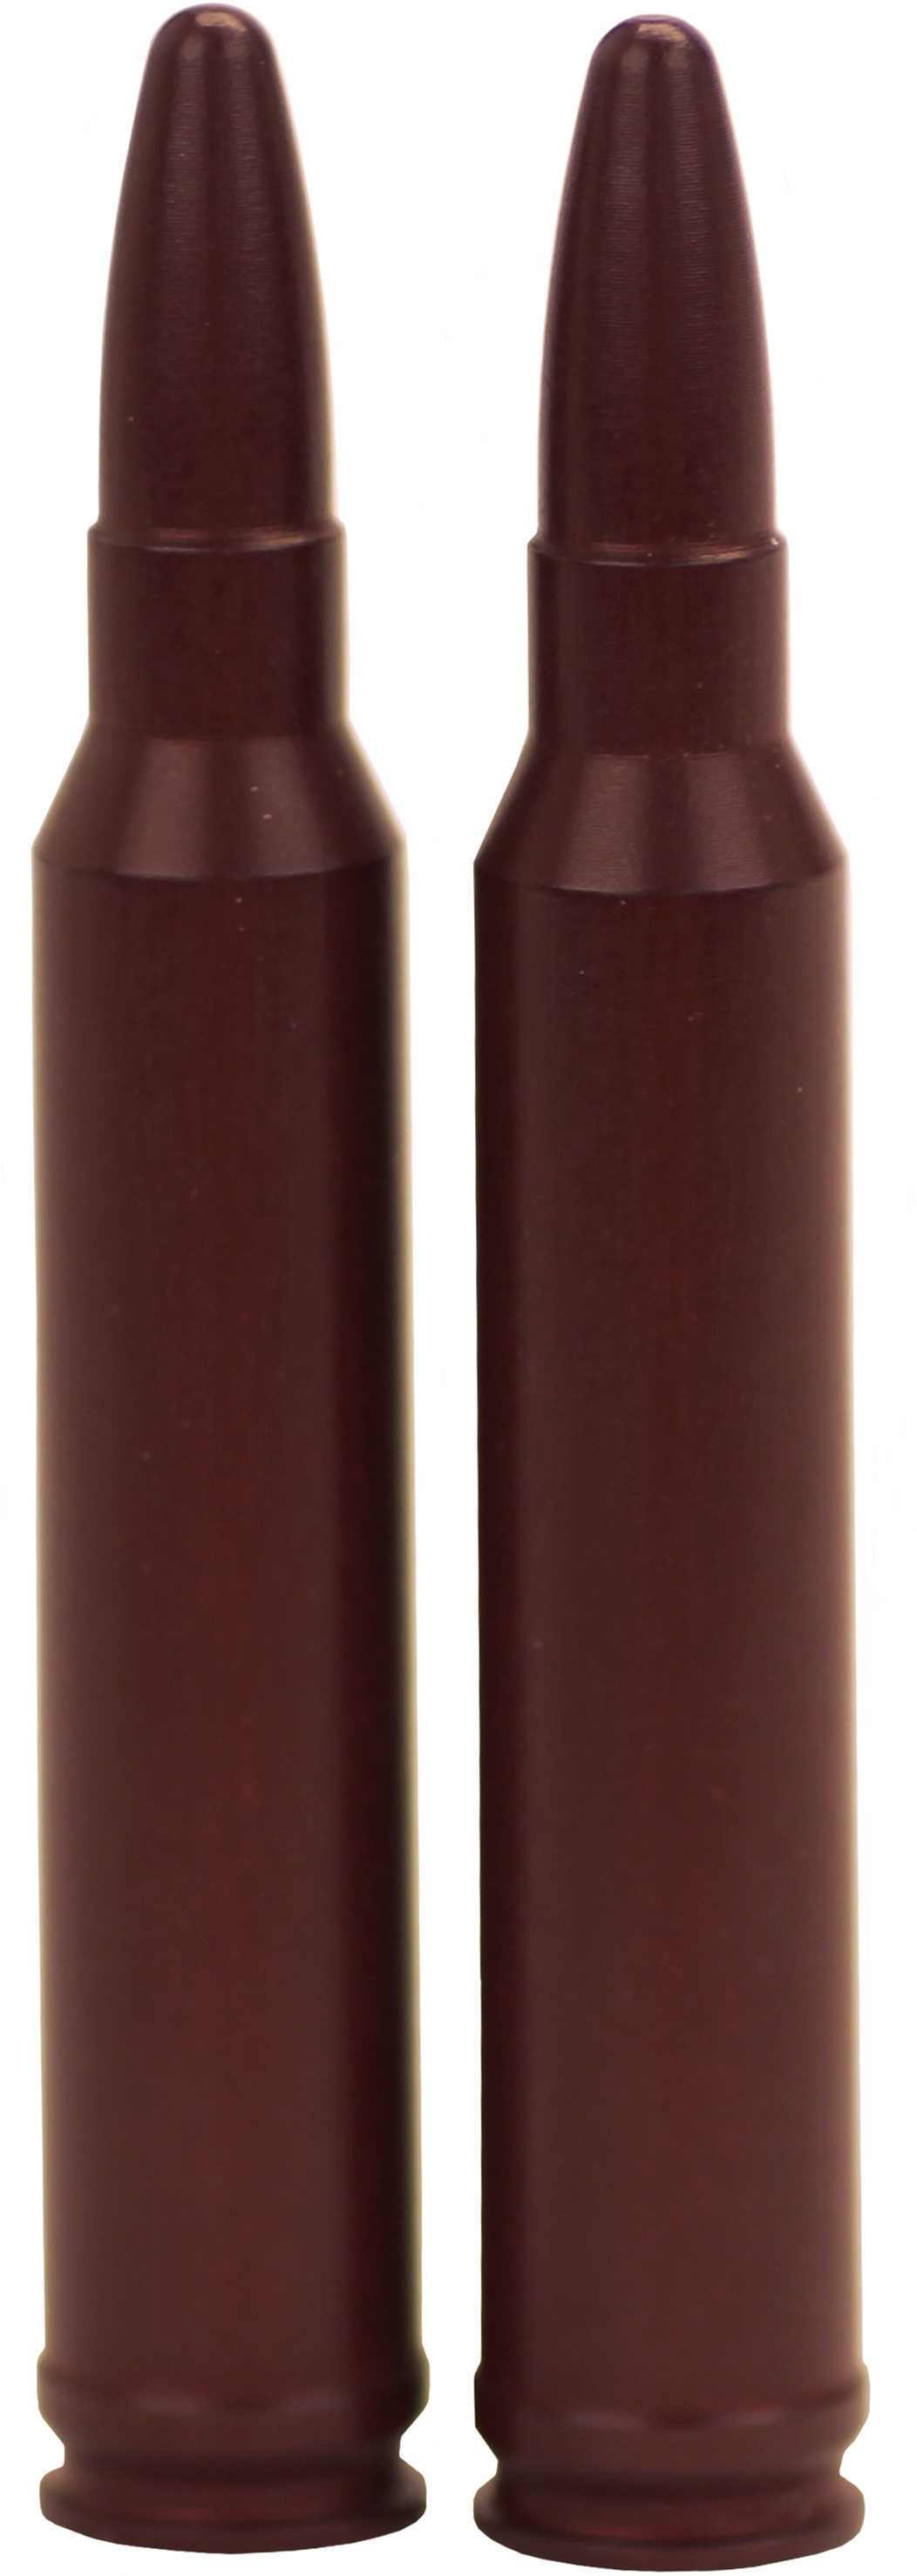 Pachmayr Azoom 300 Winchester Mag Snap Caps 2 Pack Md: 12237